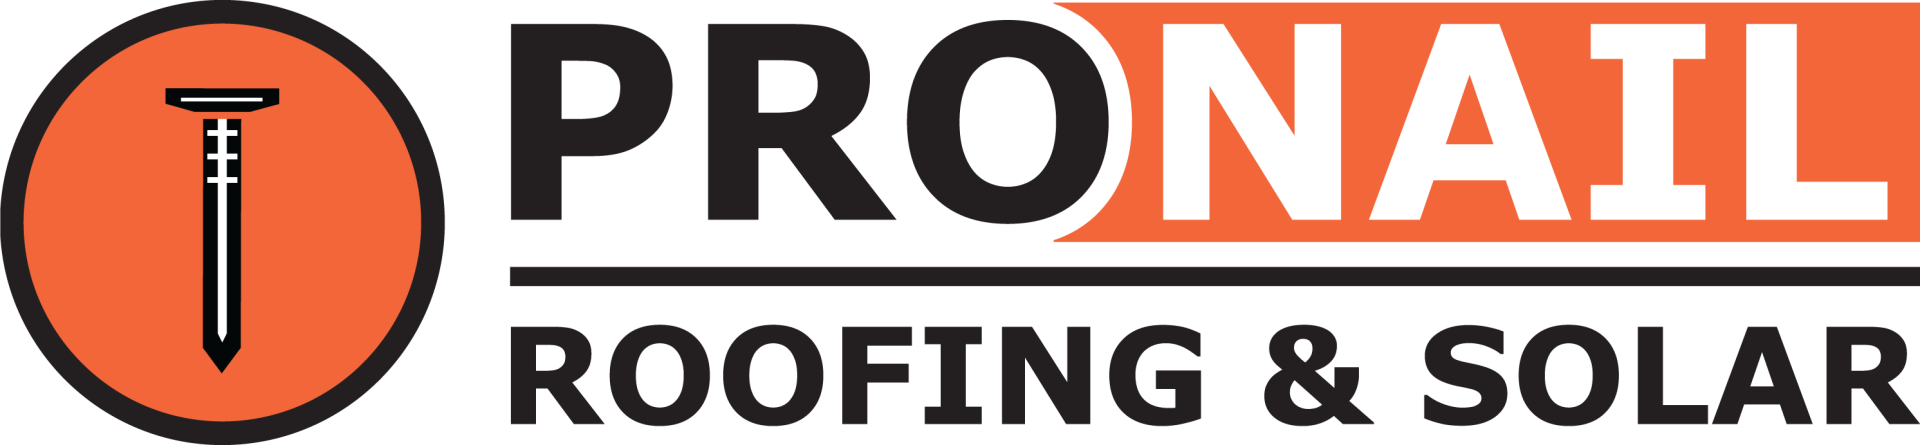 ProNail Roofing & Solar Shares Some Helpful Tips on What to Consider when Hiring a Roofer